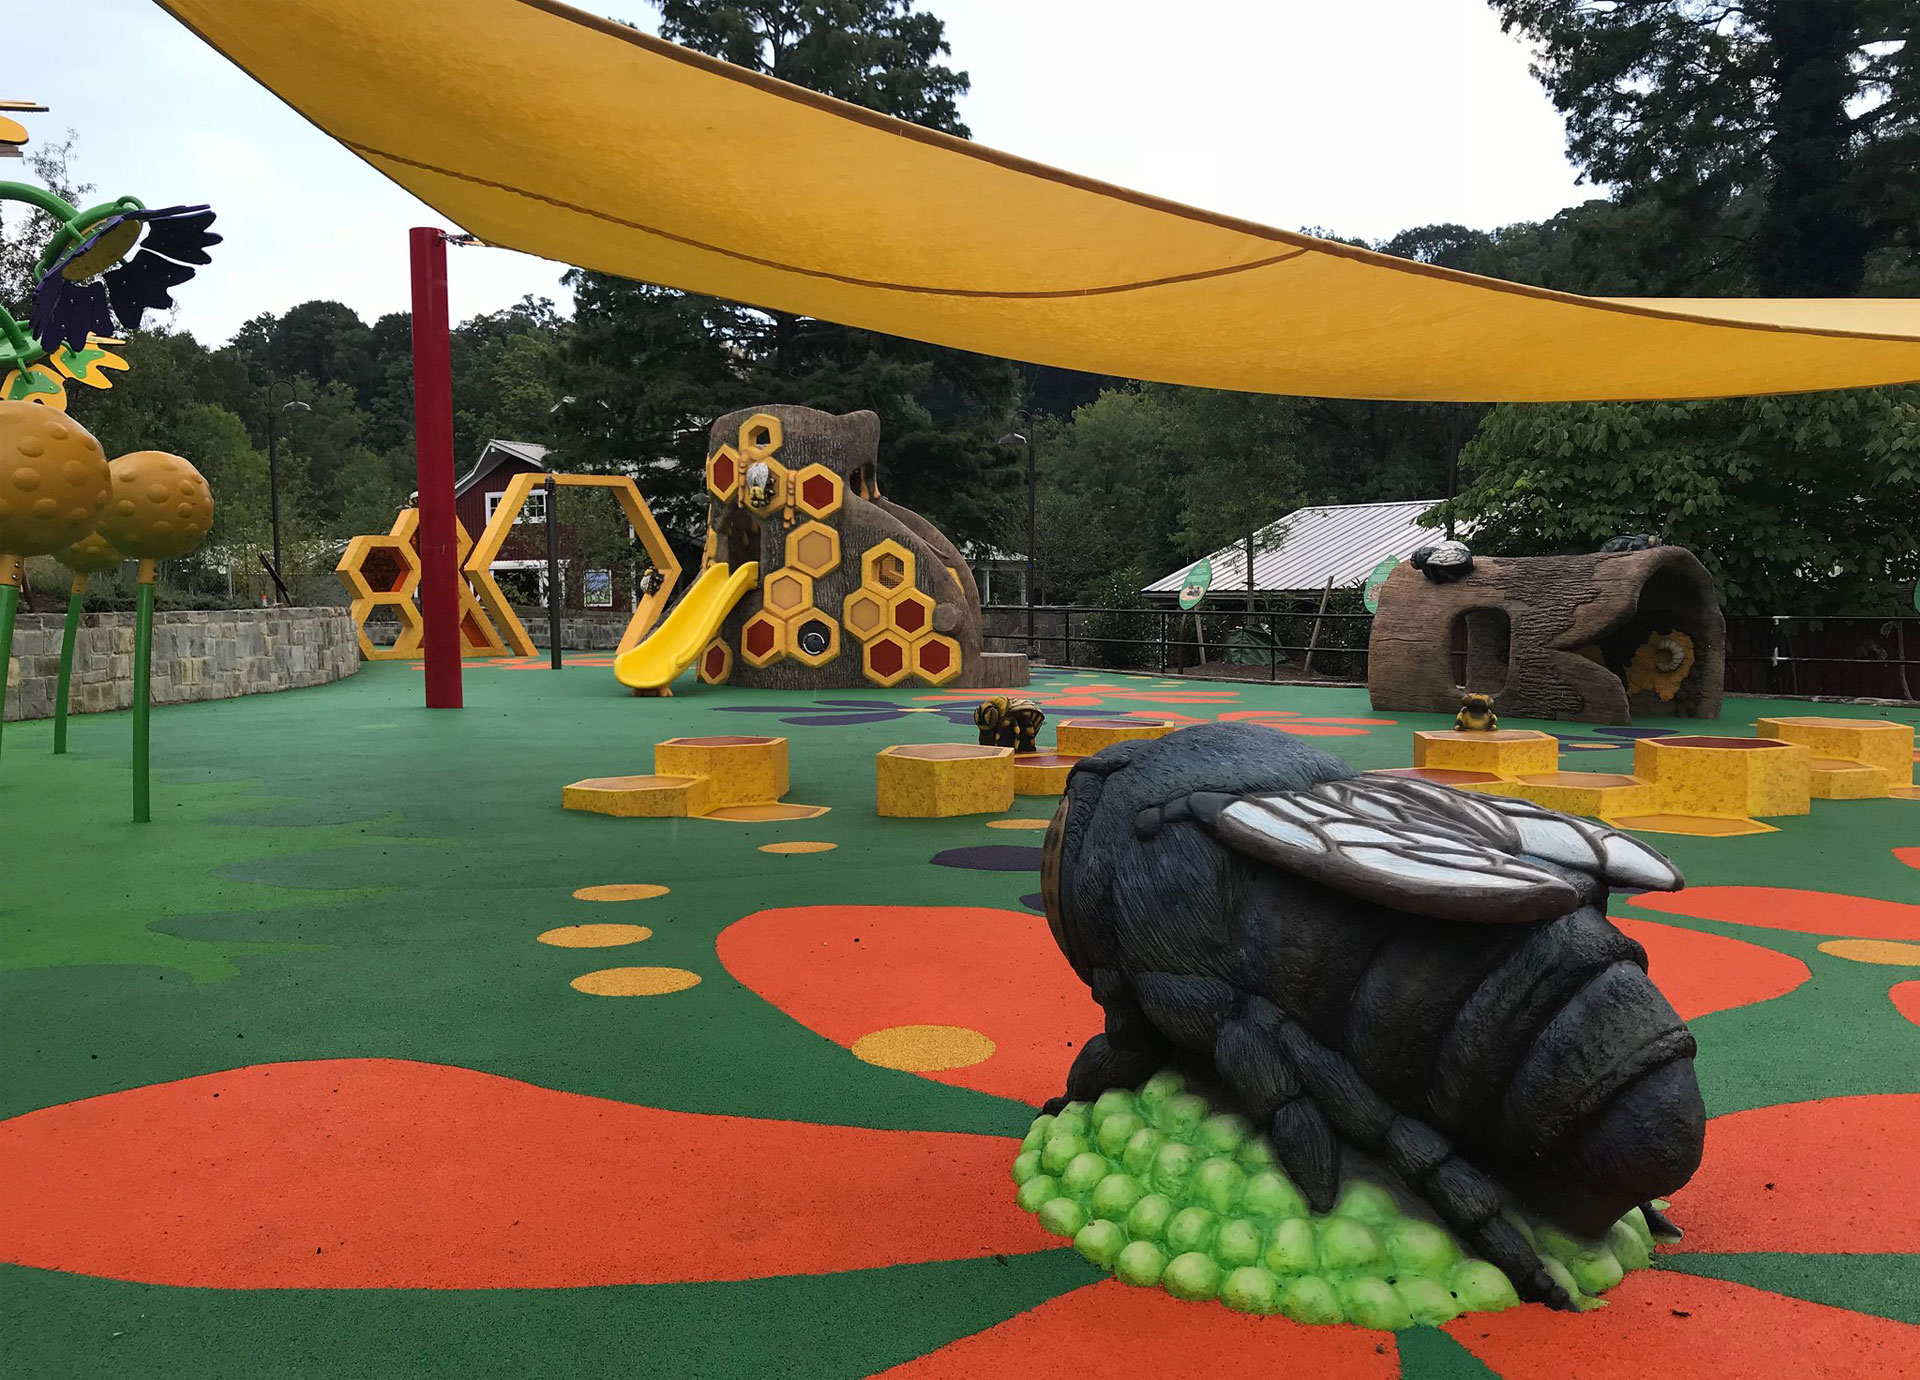 A playground with a variety of sensory experiences